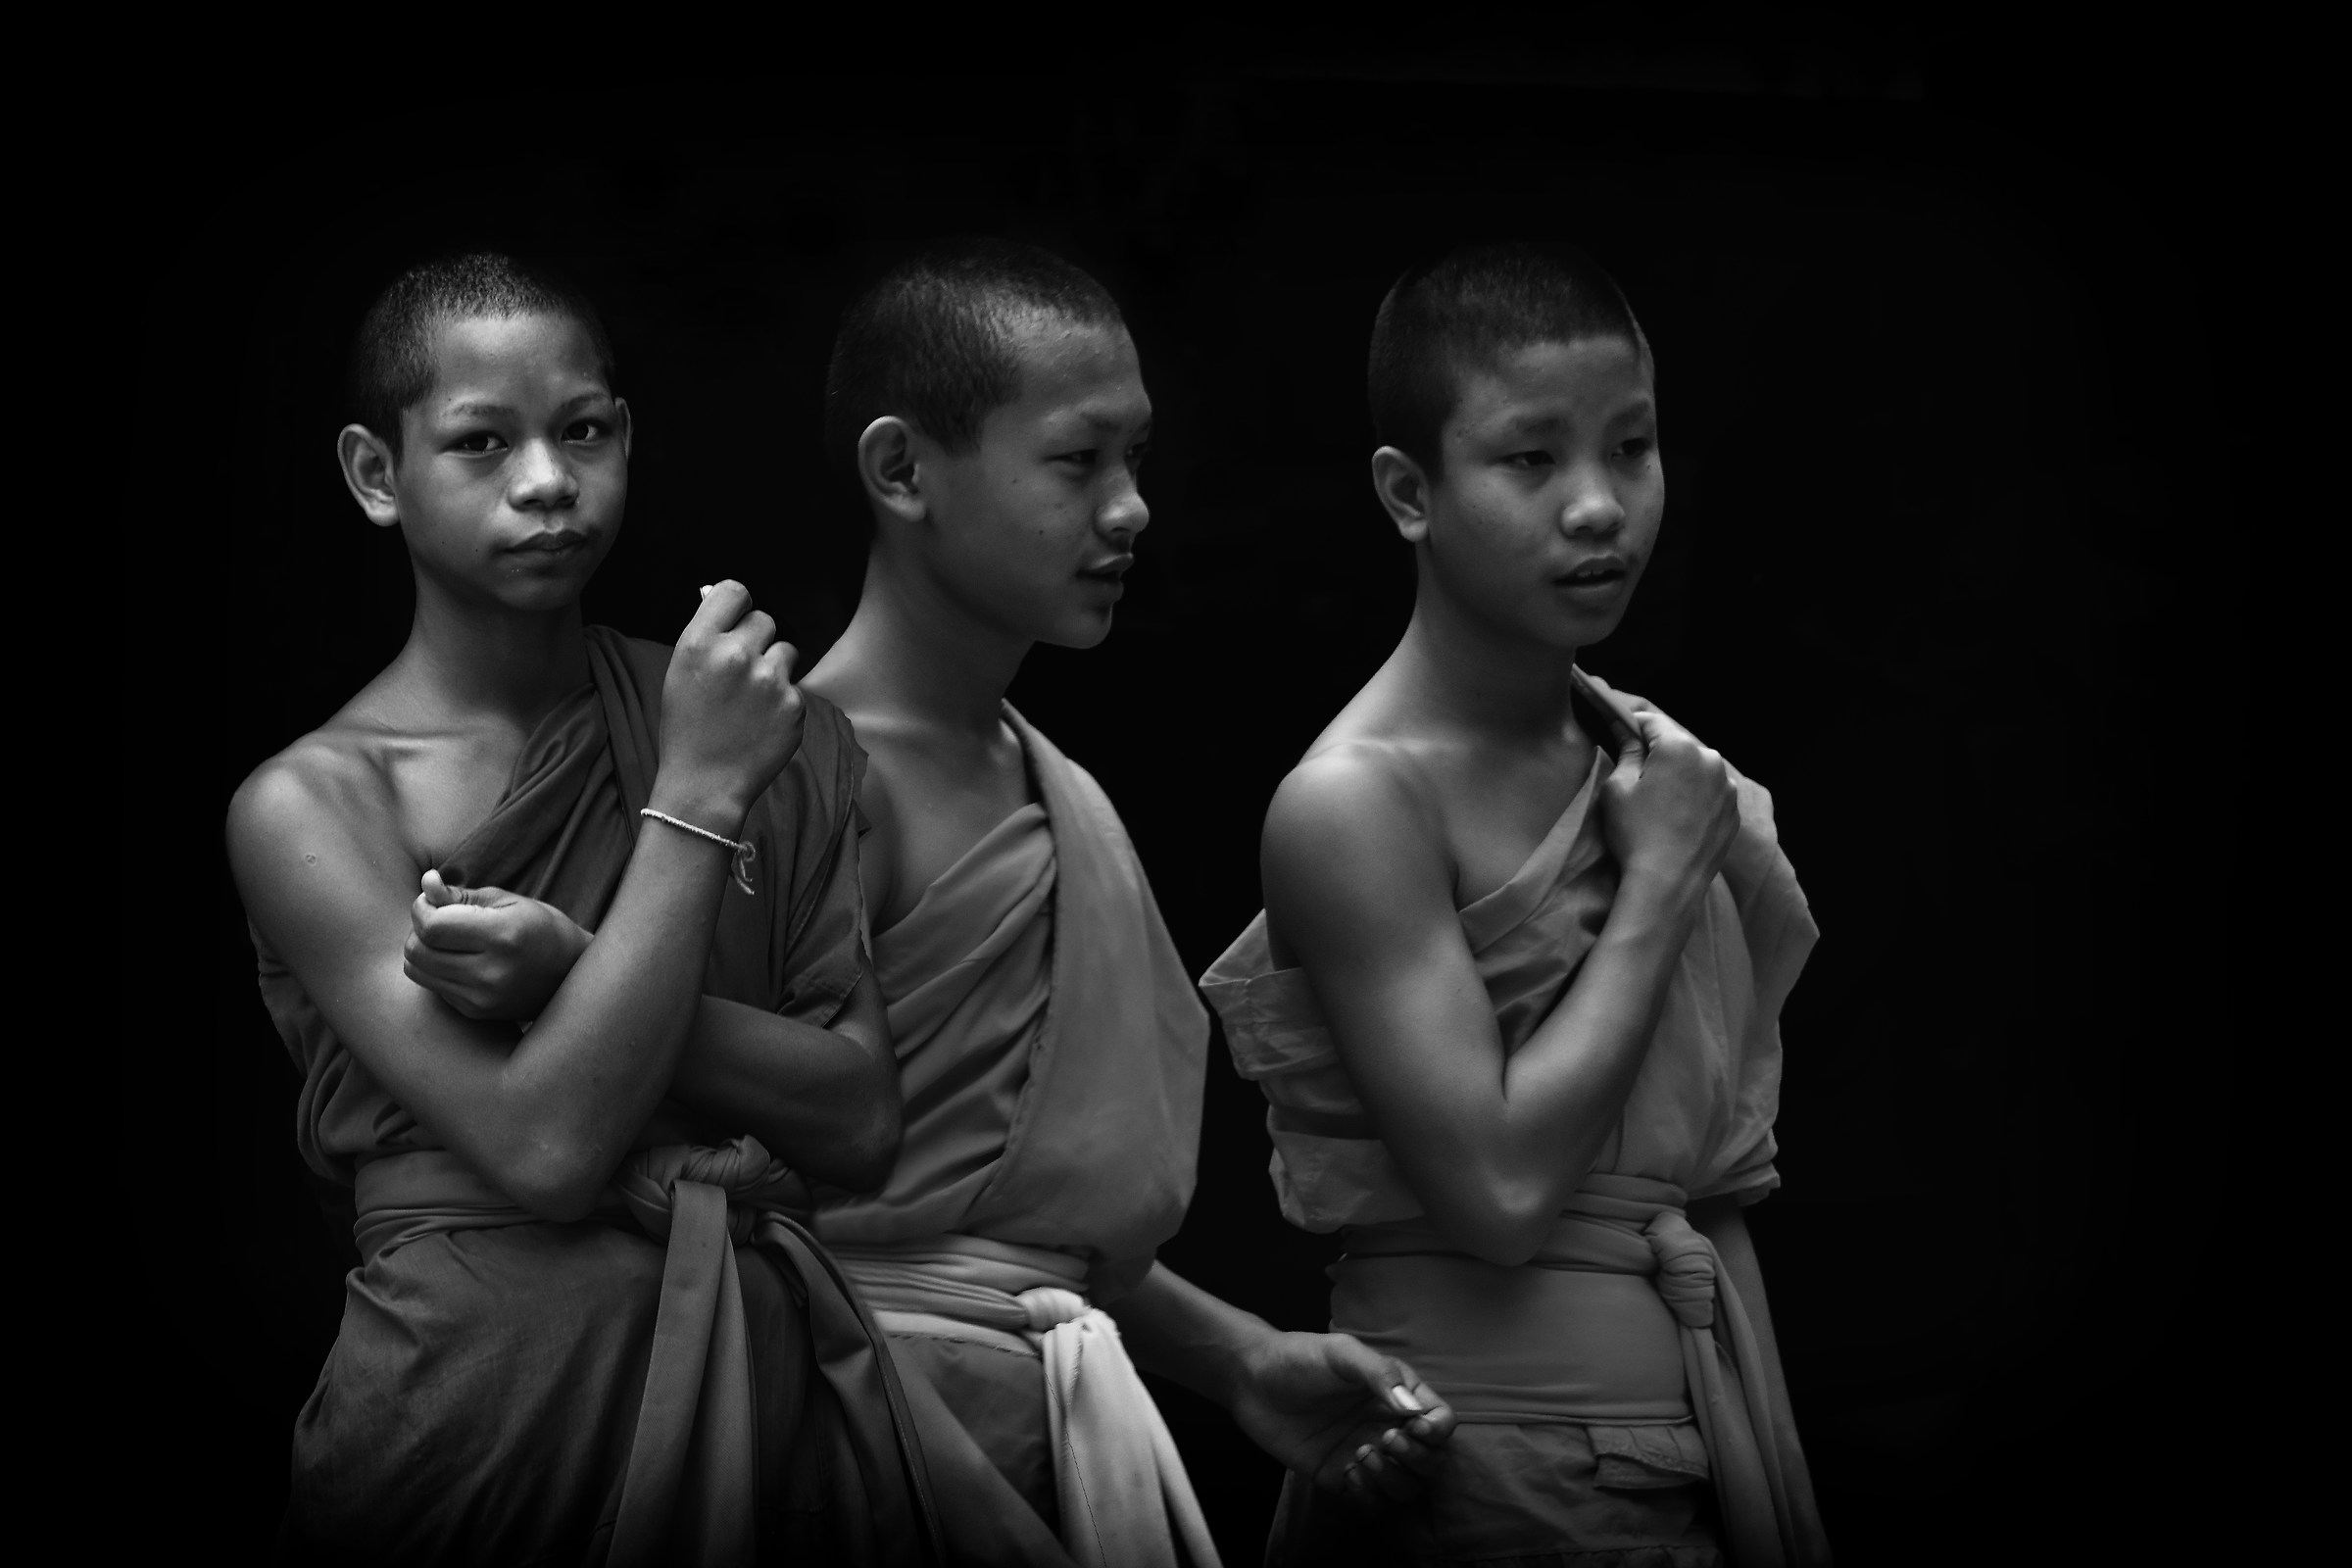 The young monks...